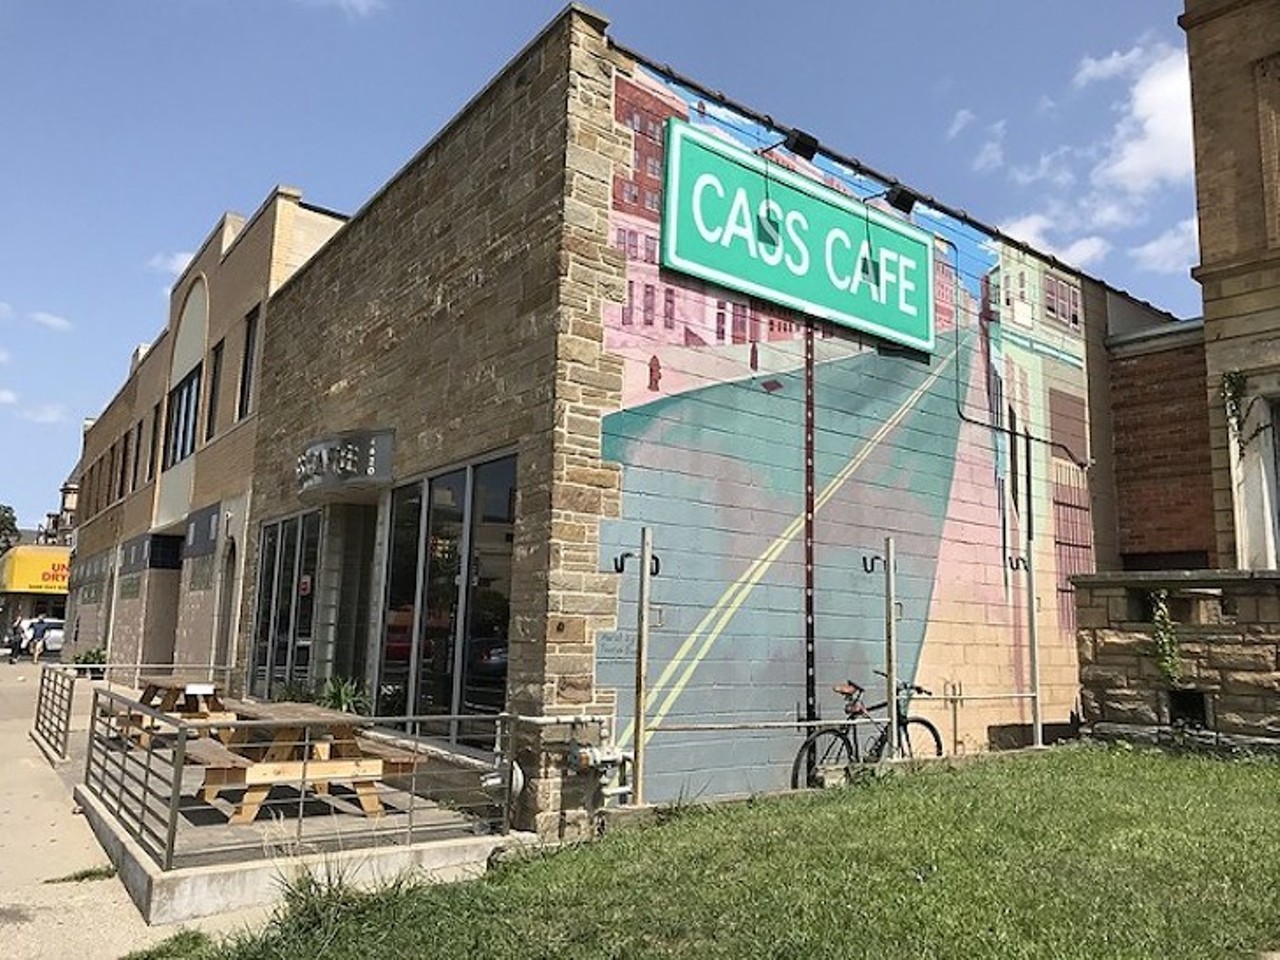 Cass Cafe
4620 Cass Ave., Detroit
Cass Cafe has been a hub for local artists since the early 1990s. The beloved local restaurant was also a hotspot for vegans and vegetarians due to several meatless options on the menu. The Midtown favorite closed in July.